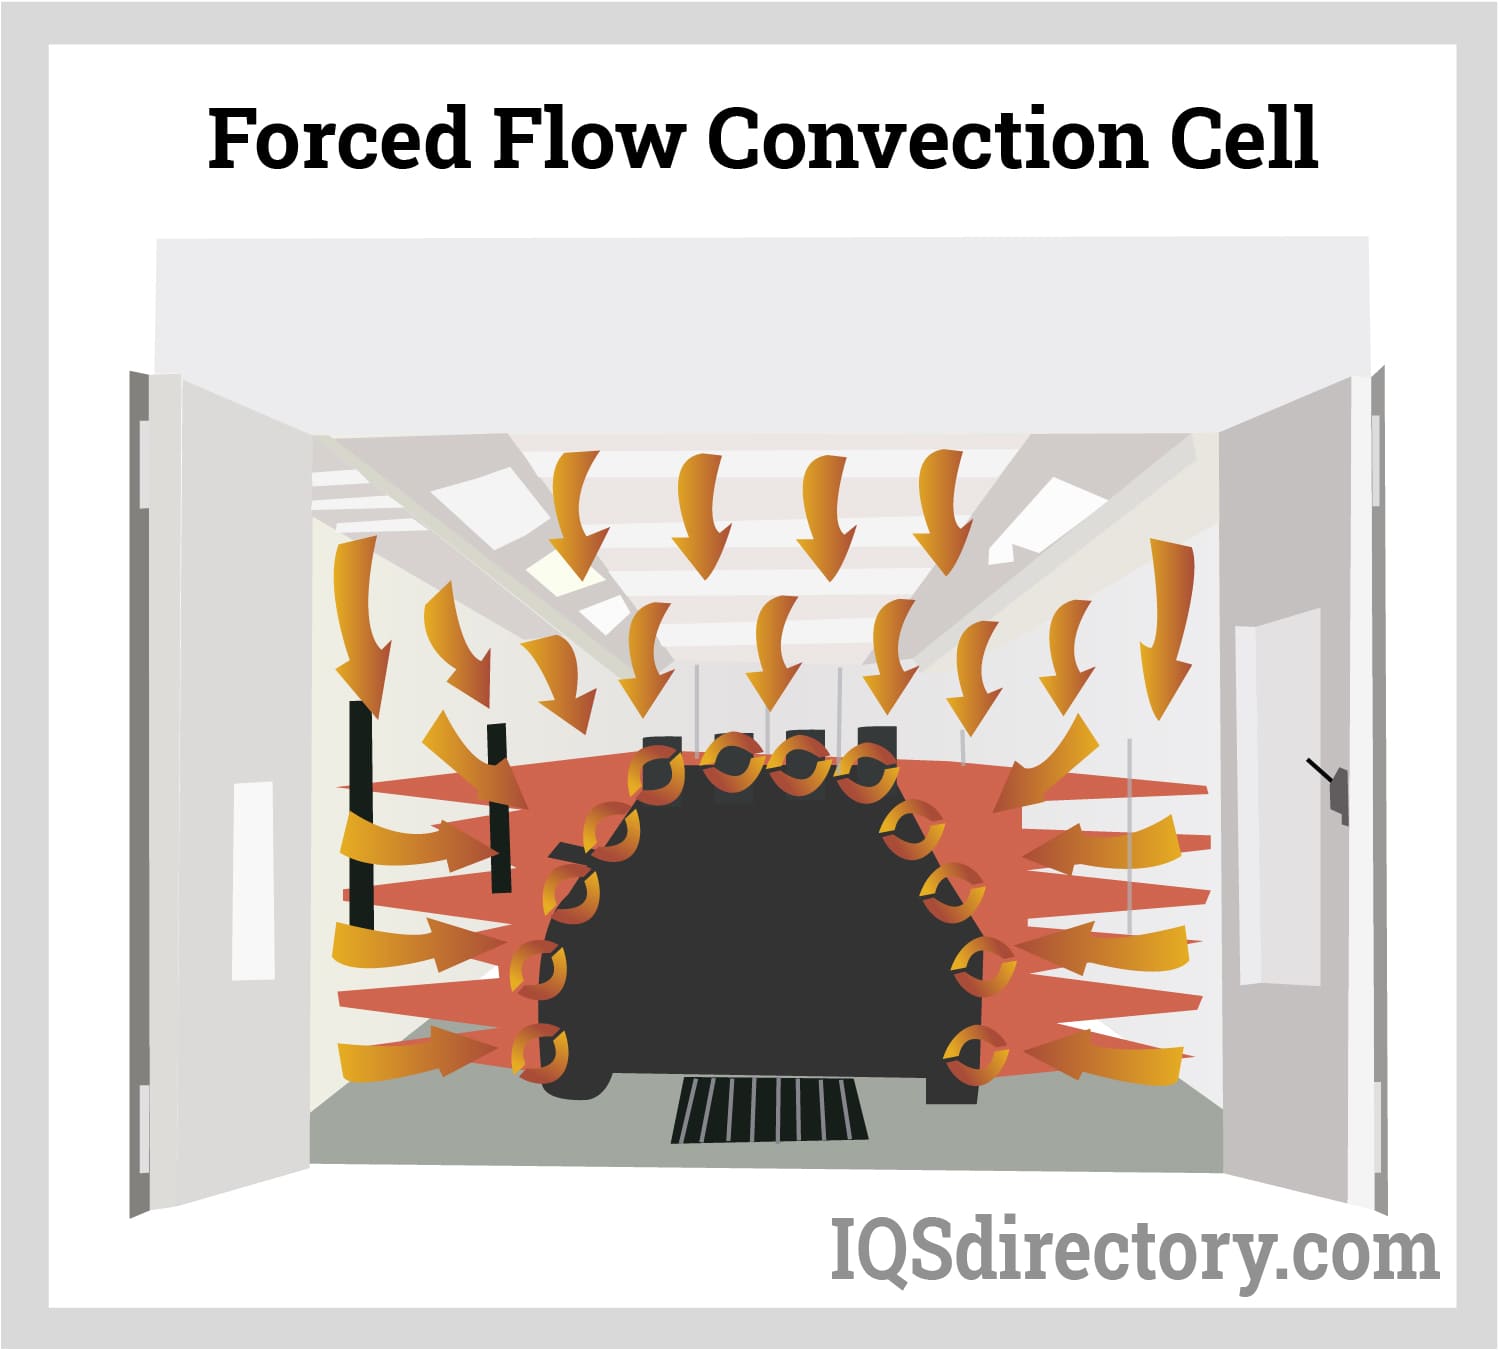 Forced Flow Convection Cell